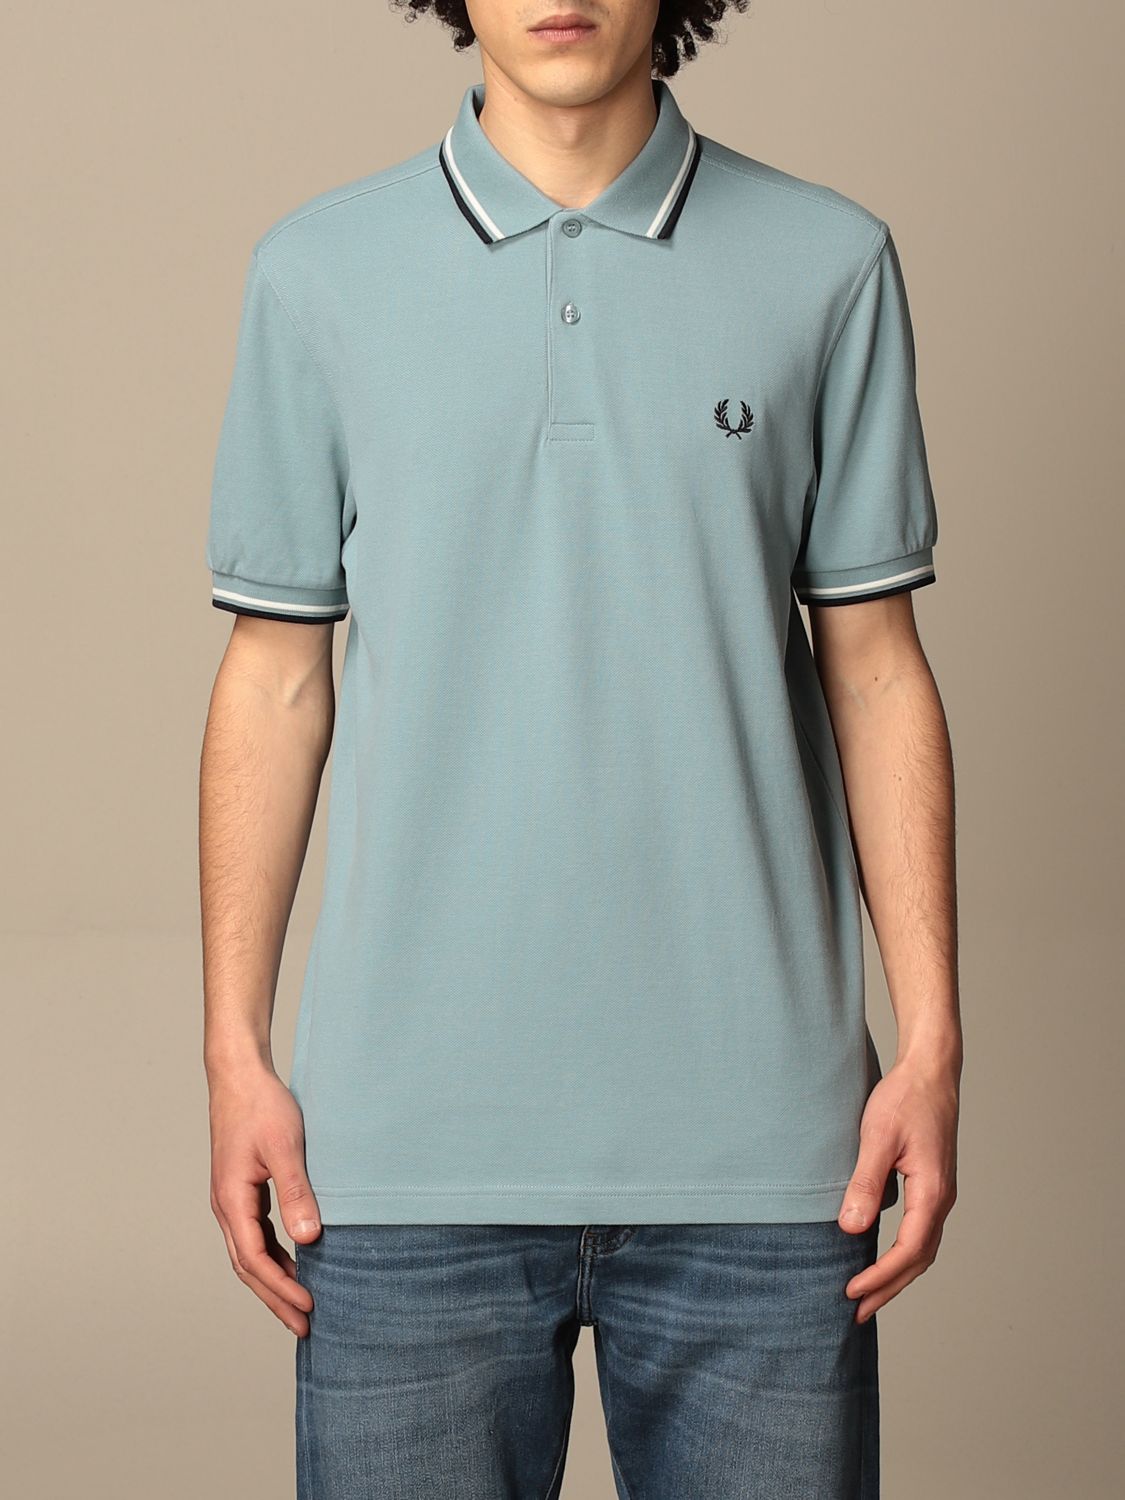 FRED PERRY: Polo shirt men | Polo Shirt Fred Perry Men Gnawed Blue | Polo Shirt Fred Perry M3600 